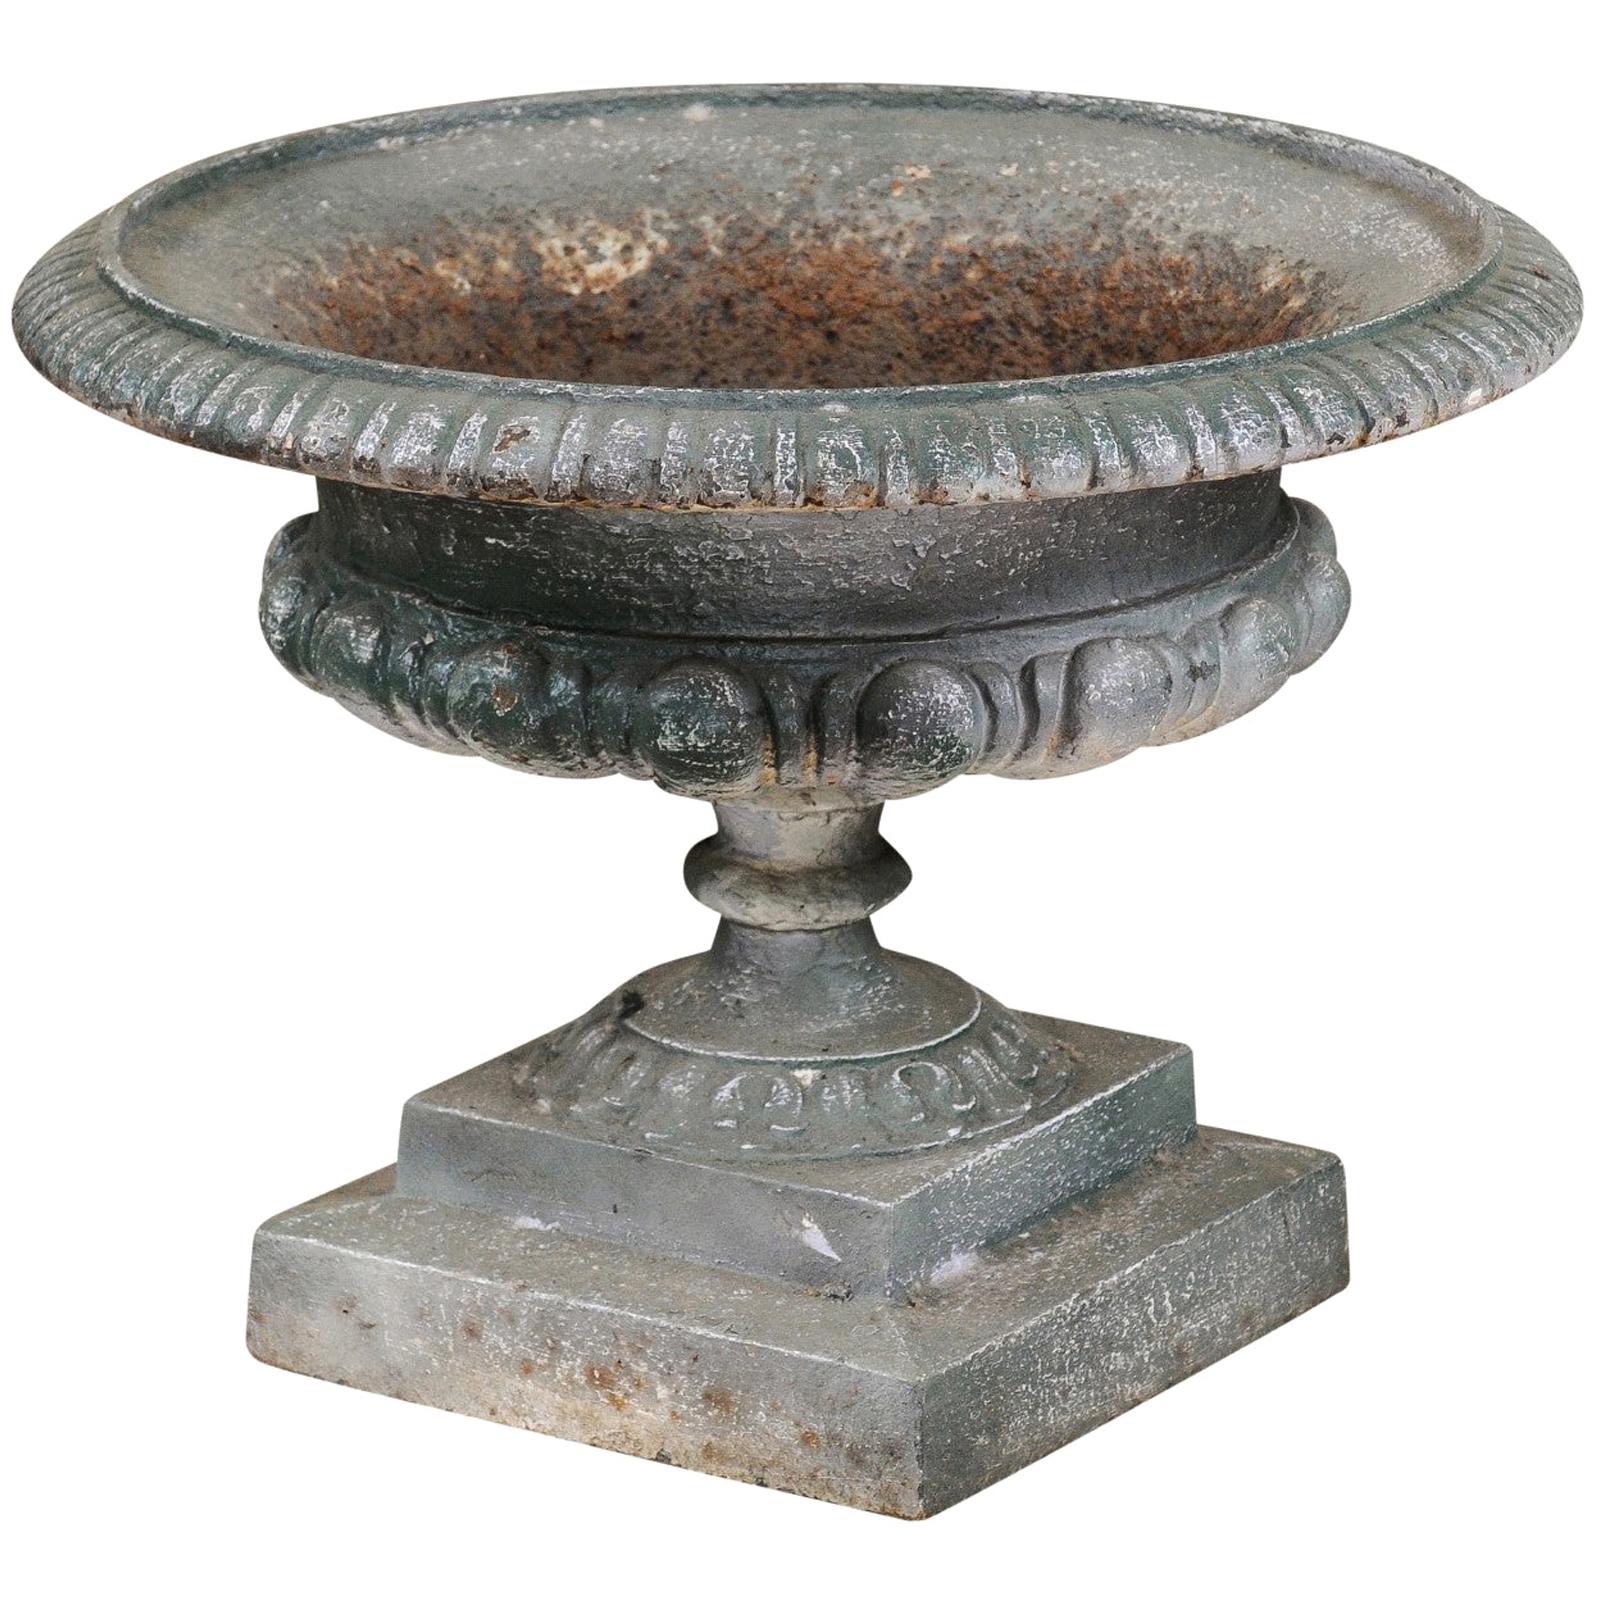 French 19th Century Iron Jardinière with Ovoid Motifs and Distressed Patina